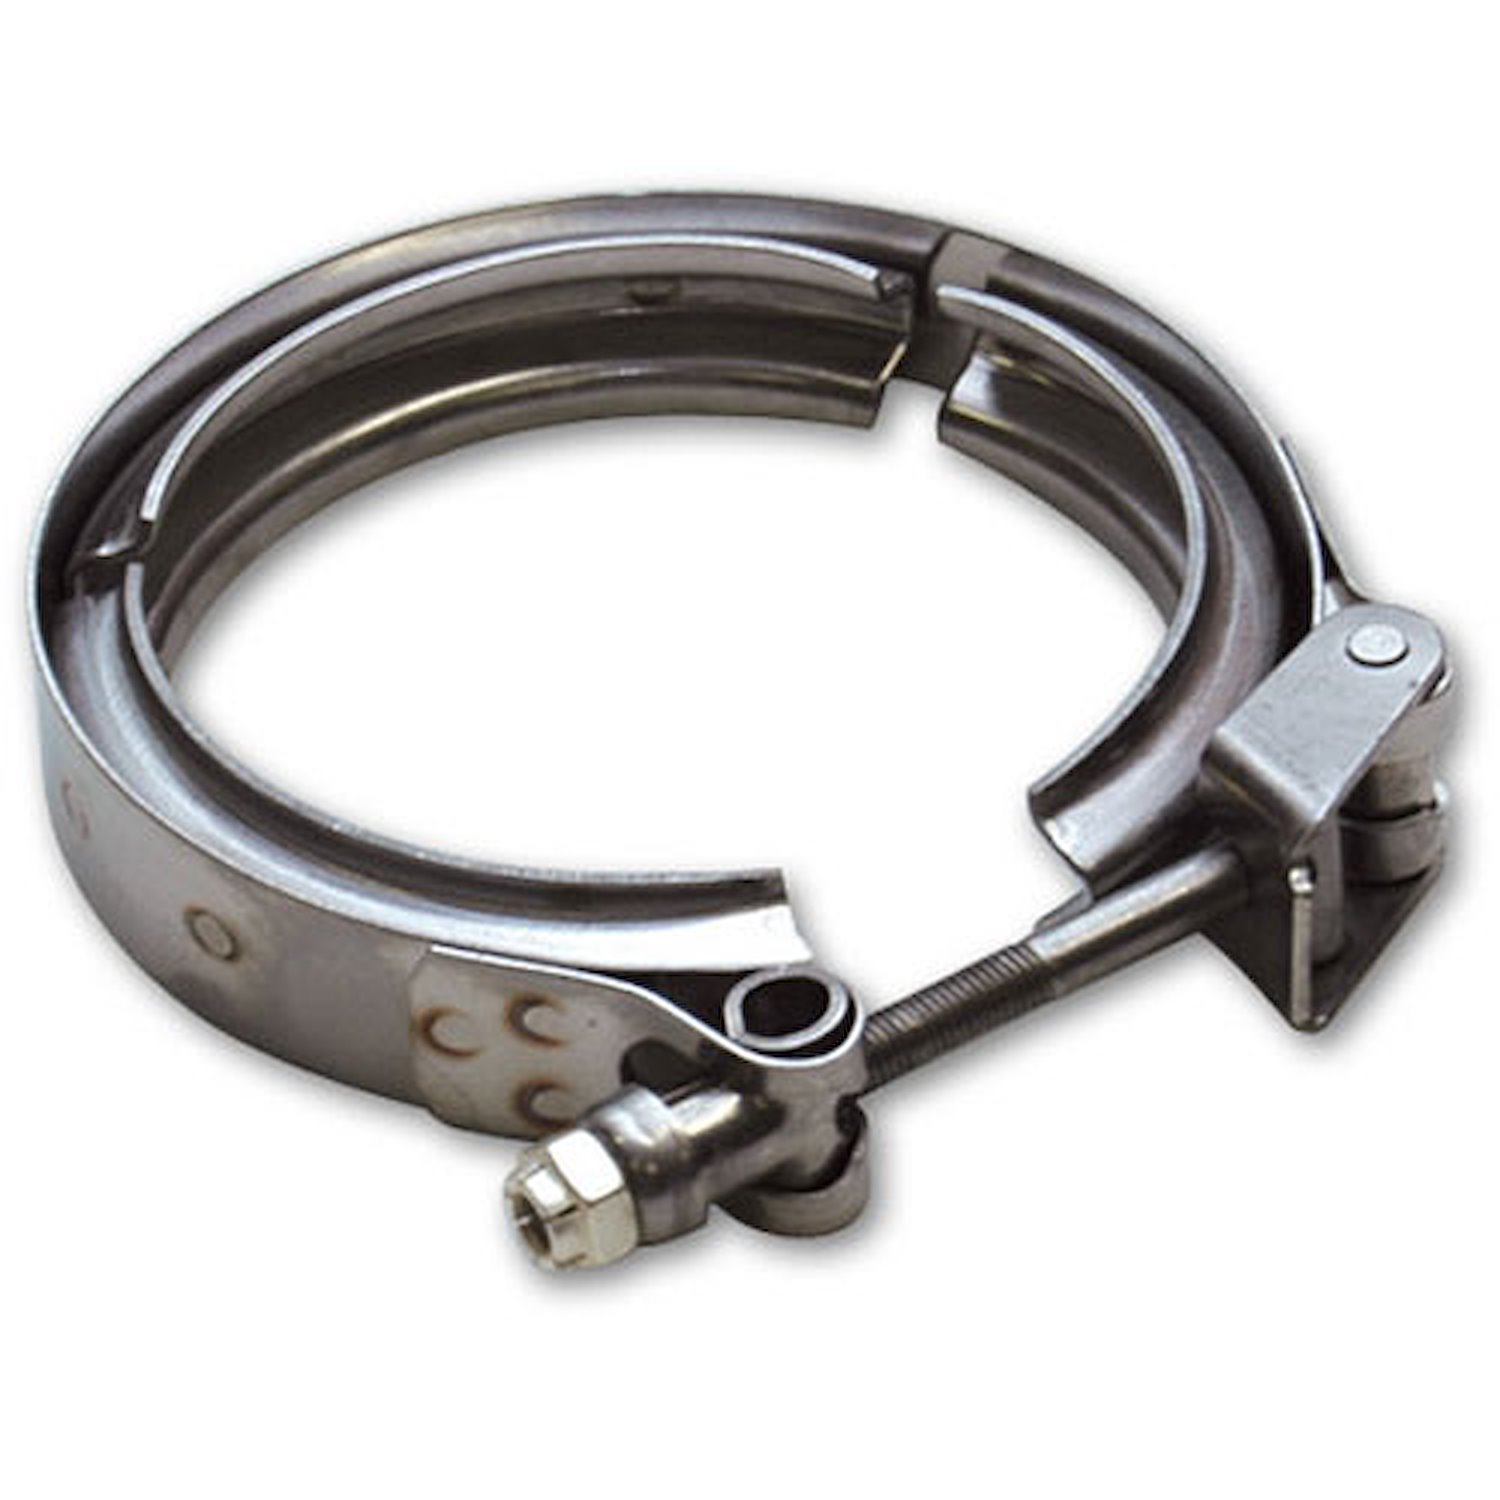 Quick-Release V-Band Clamp For V-Band Flanges up to 1.75" OD